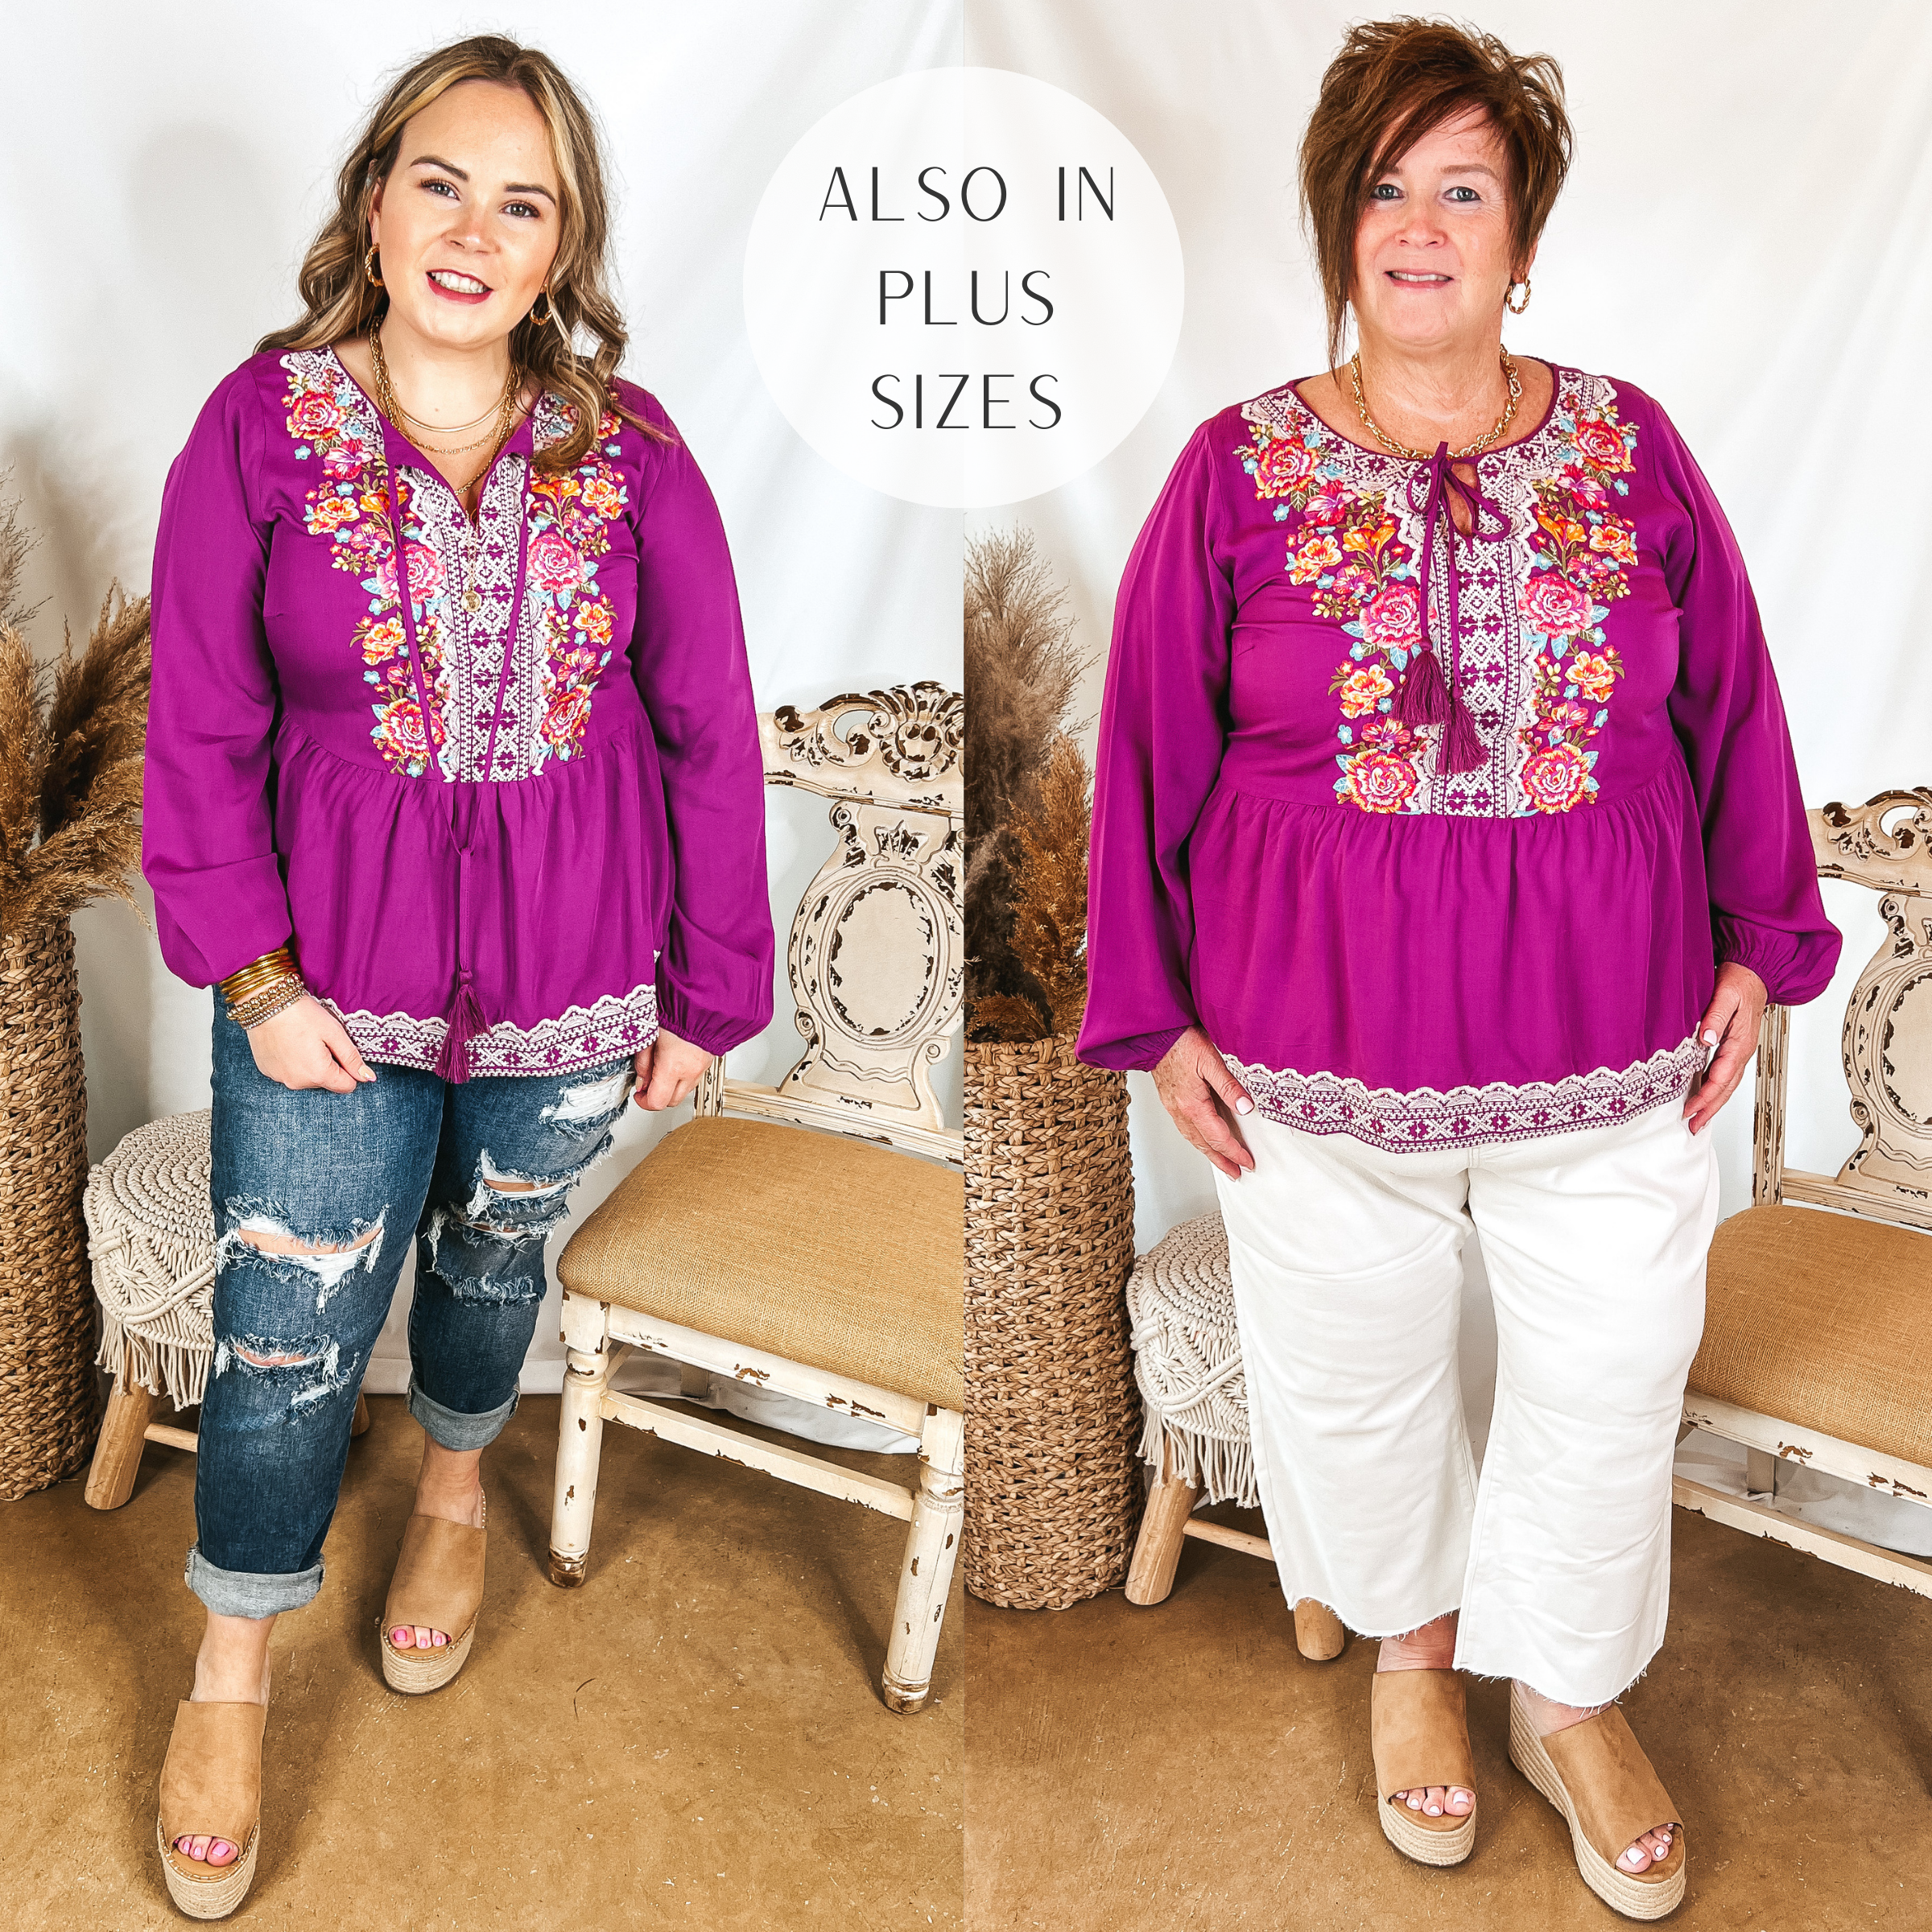 Models are wearing a purple top that has a front keyhole and colorful floral embroidery. Size large model has it paired with boyfriend jeans, tan wedges, and gold jewelry. Plus size model has it paired with white cropped jeans, tan wedges, and gold jewelry.